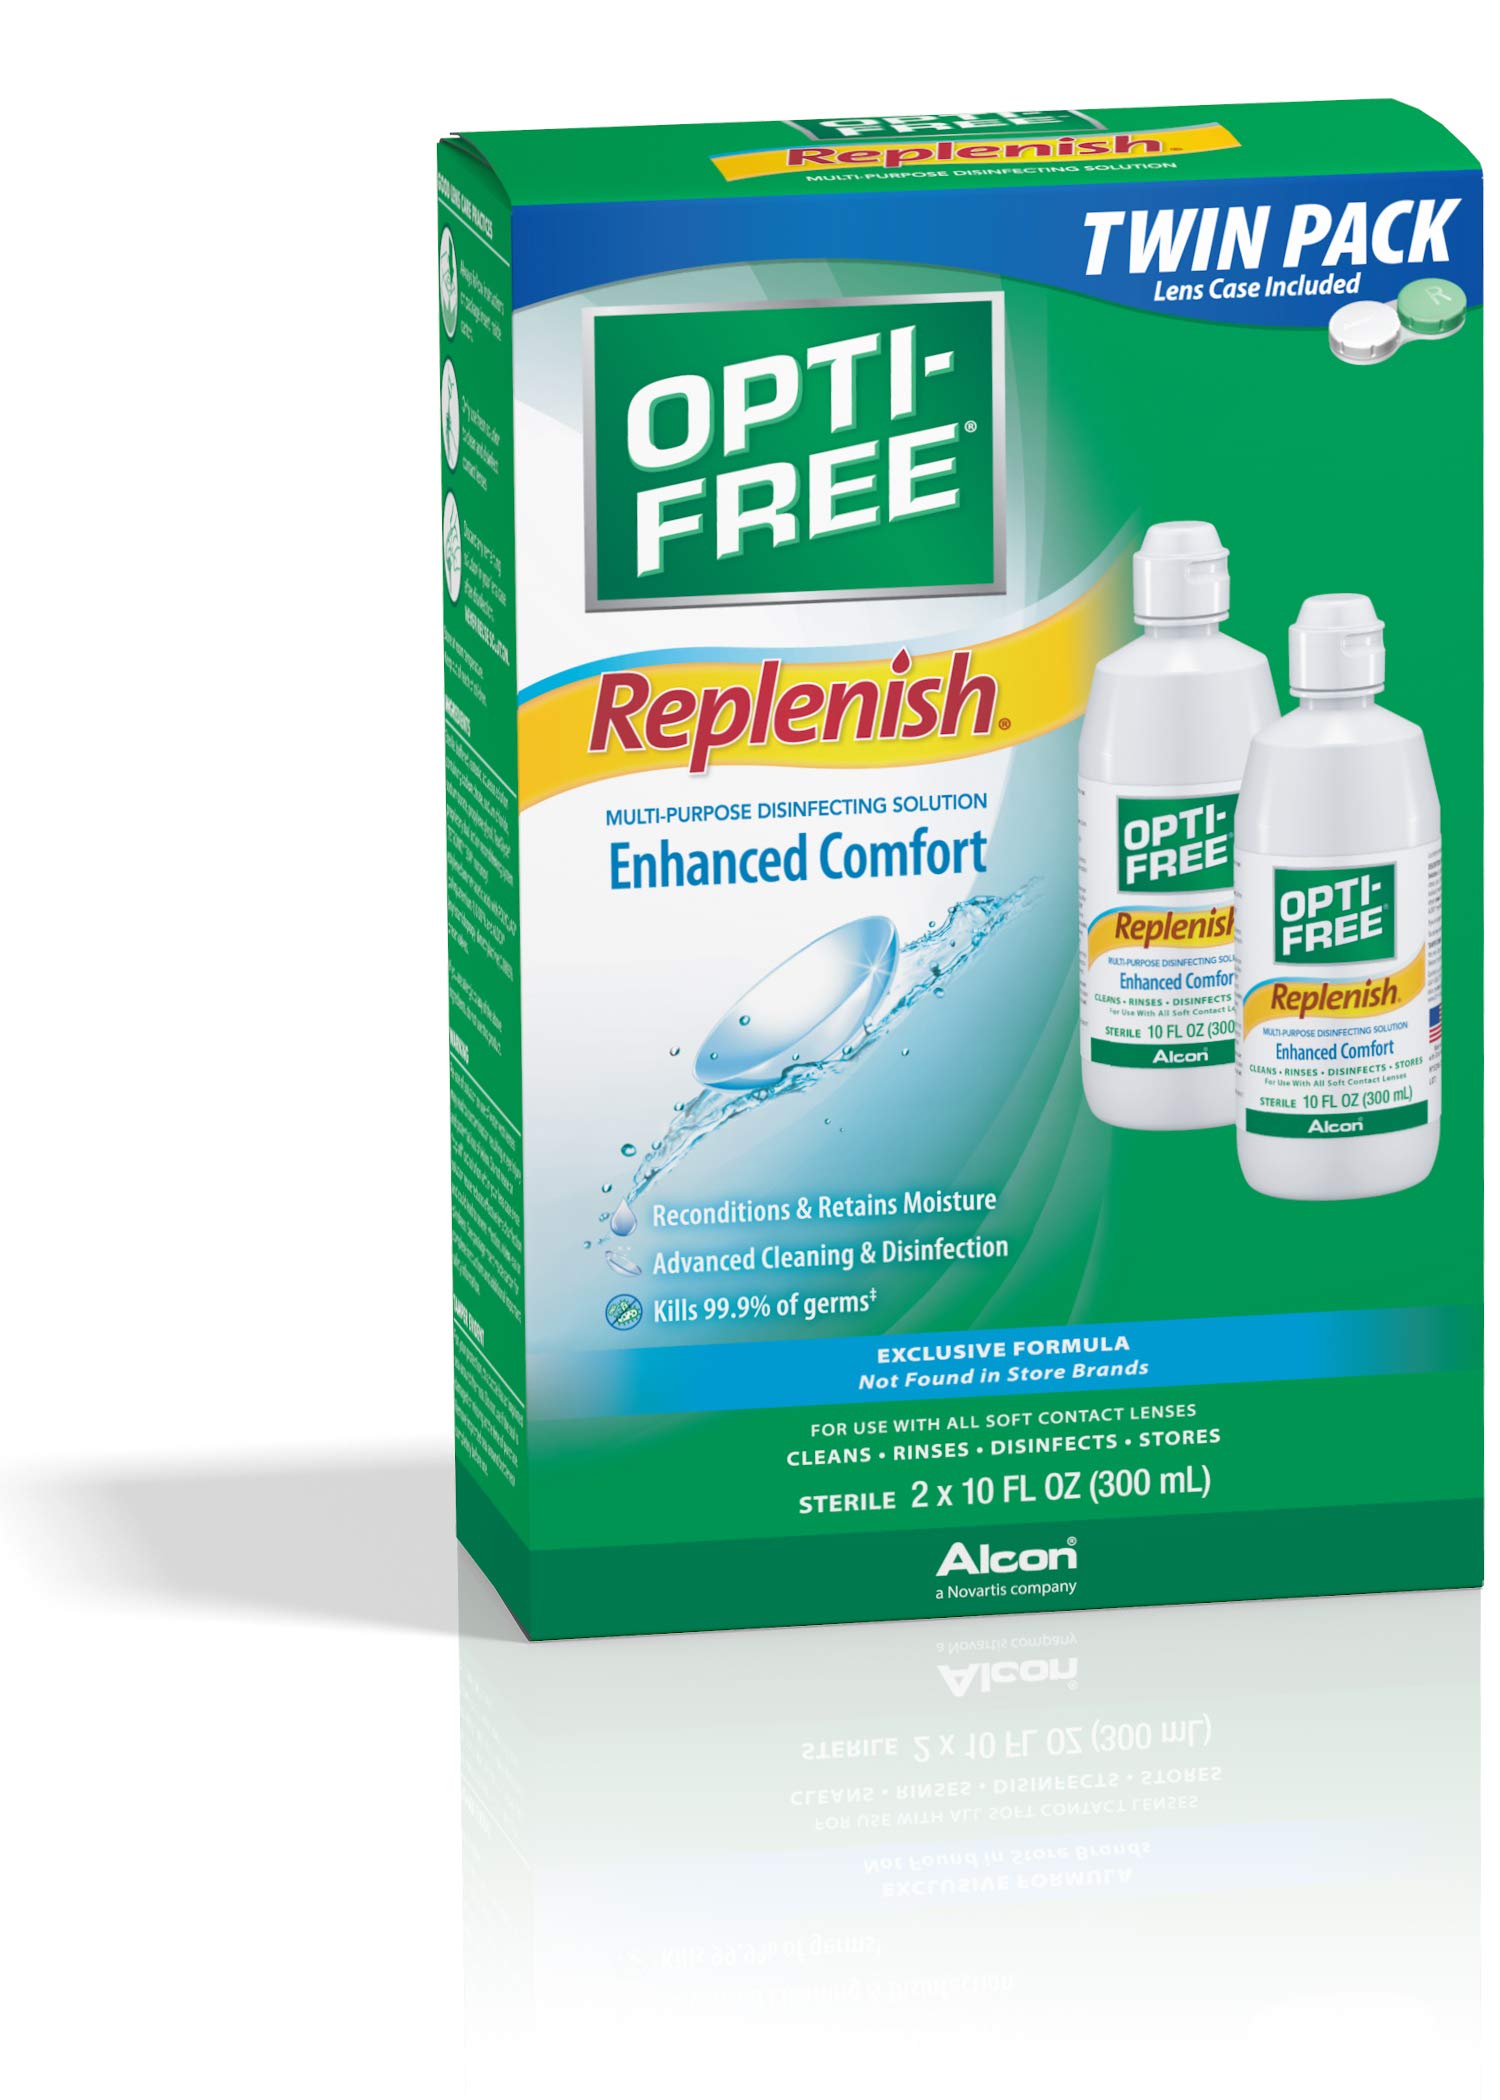 Opti-Free Replenish Multi-Purpose Disinfecting Solution with Lens Case, Twin Pack, 10-Fluid Ounces Each - 2 Count(Pack of 1)